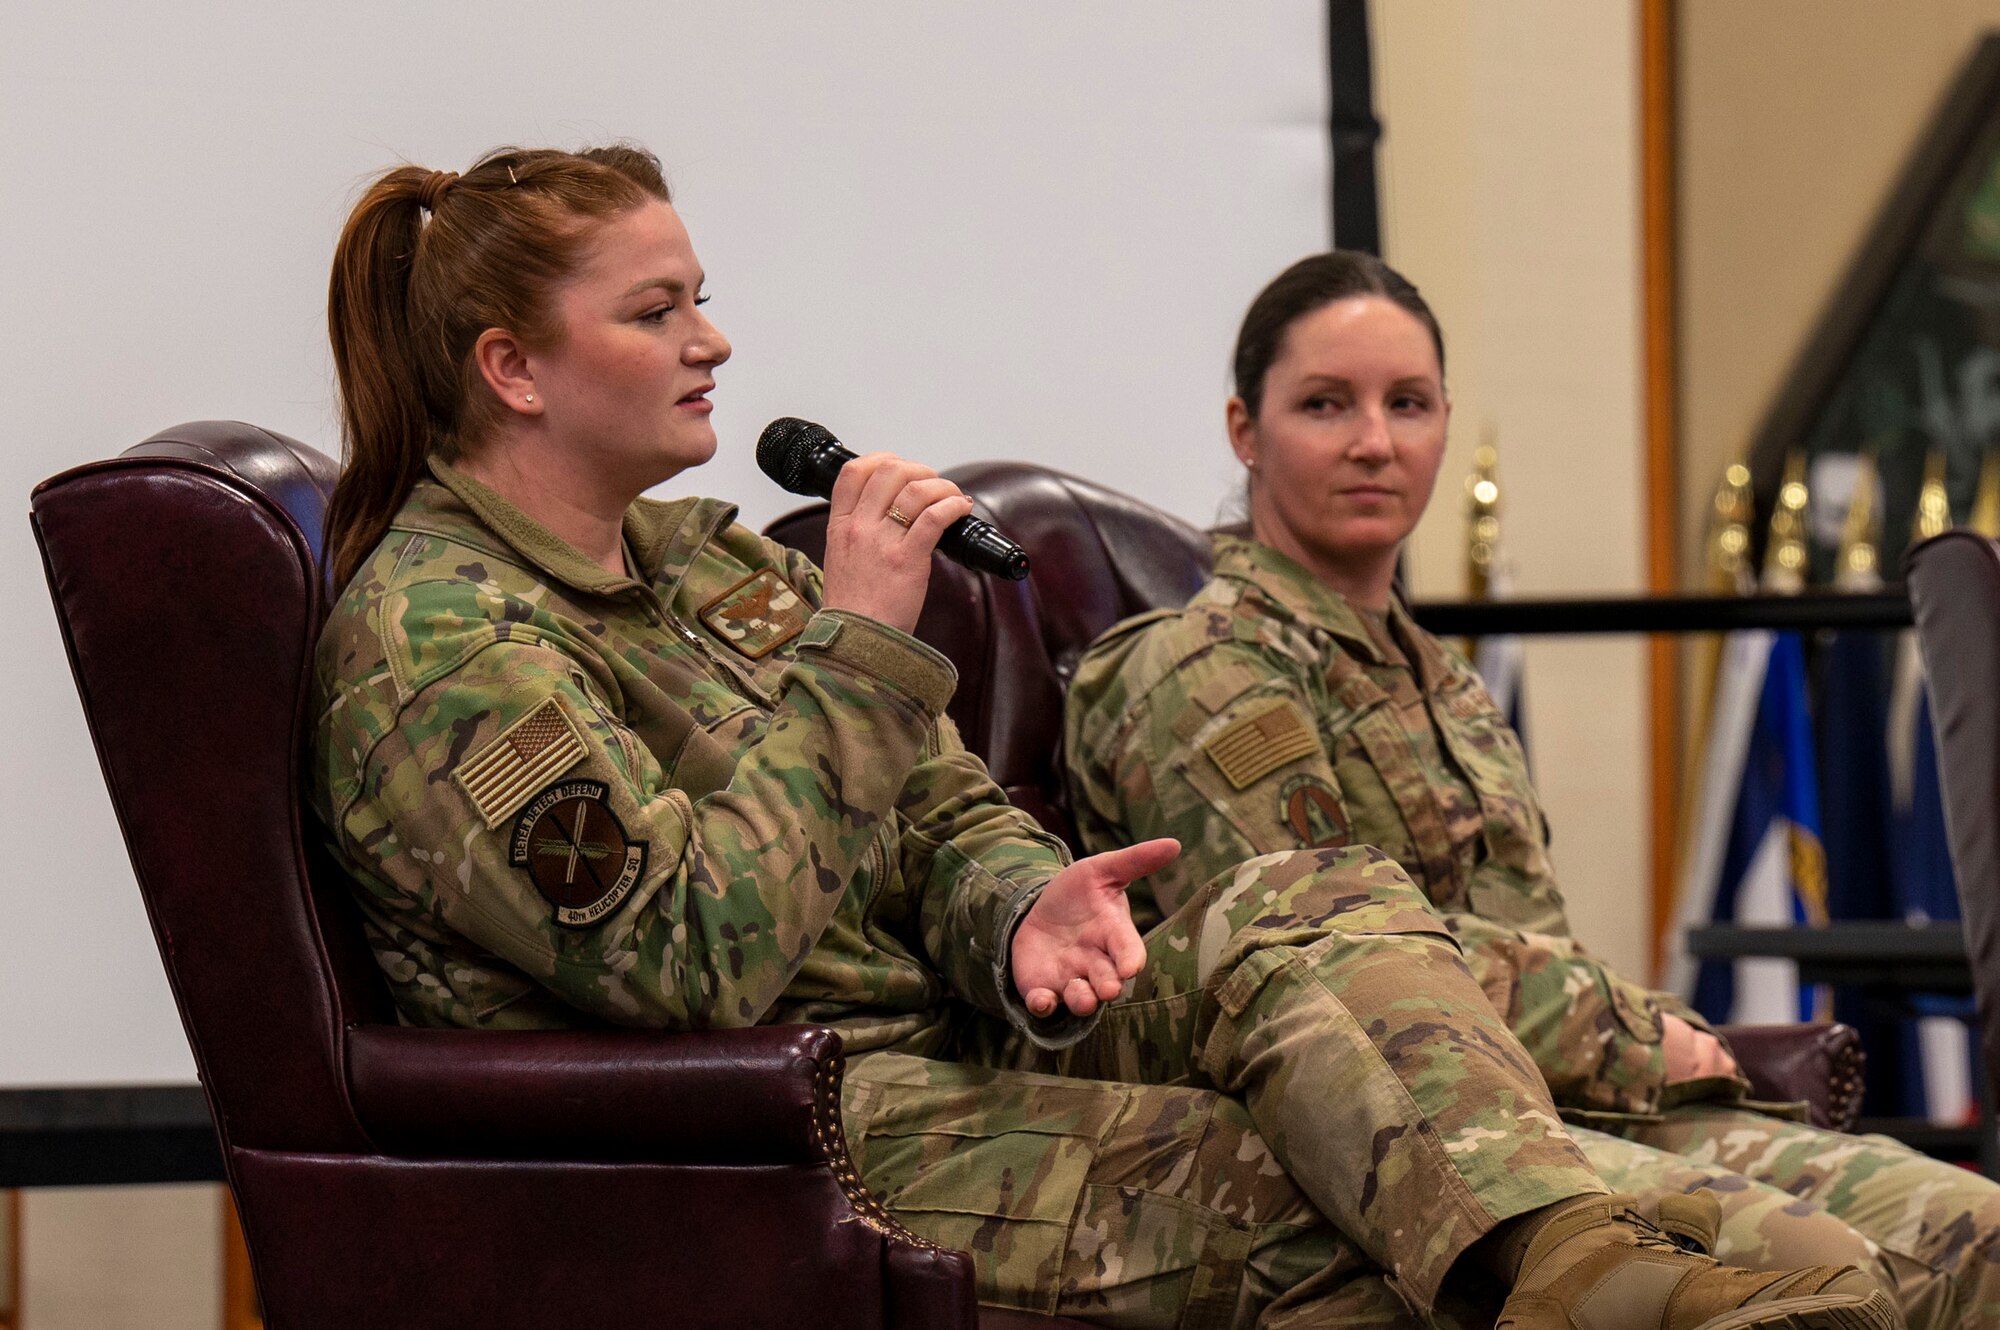 Maj. Katherine Roman, 40th Helicopter Squadron chief resource advisor, left, and Lt. Col. Julie Roloson, 341st Security Forces Squadron commander, speak at an all-female officers' panel during a women's leadership symposium March 21, 2023, at Malmstrom Air Force Base, Mont The two-day symposium was open to all on base and covered a wide range of topics to include leadership, mentorship, retention, wellness and readiness. (U.S. Air Force photo by Airman Hannah Hardy)